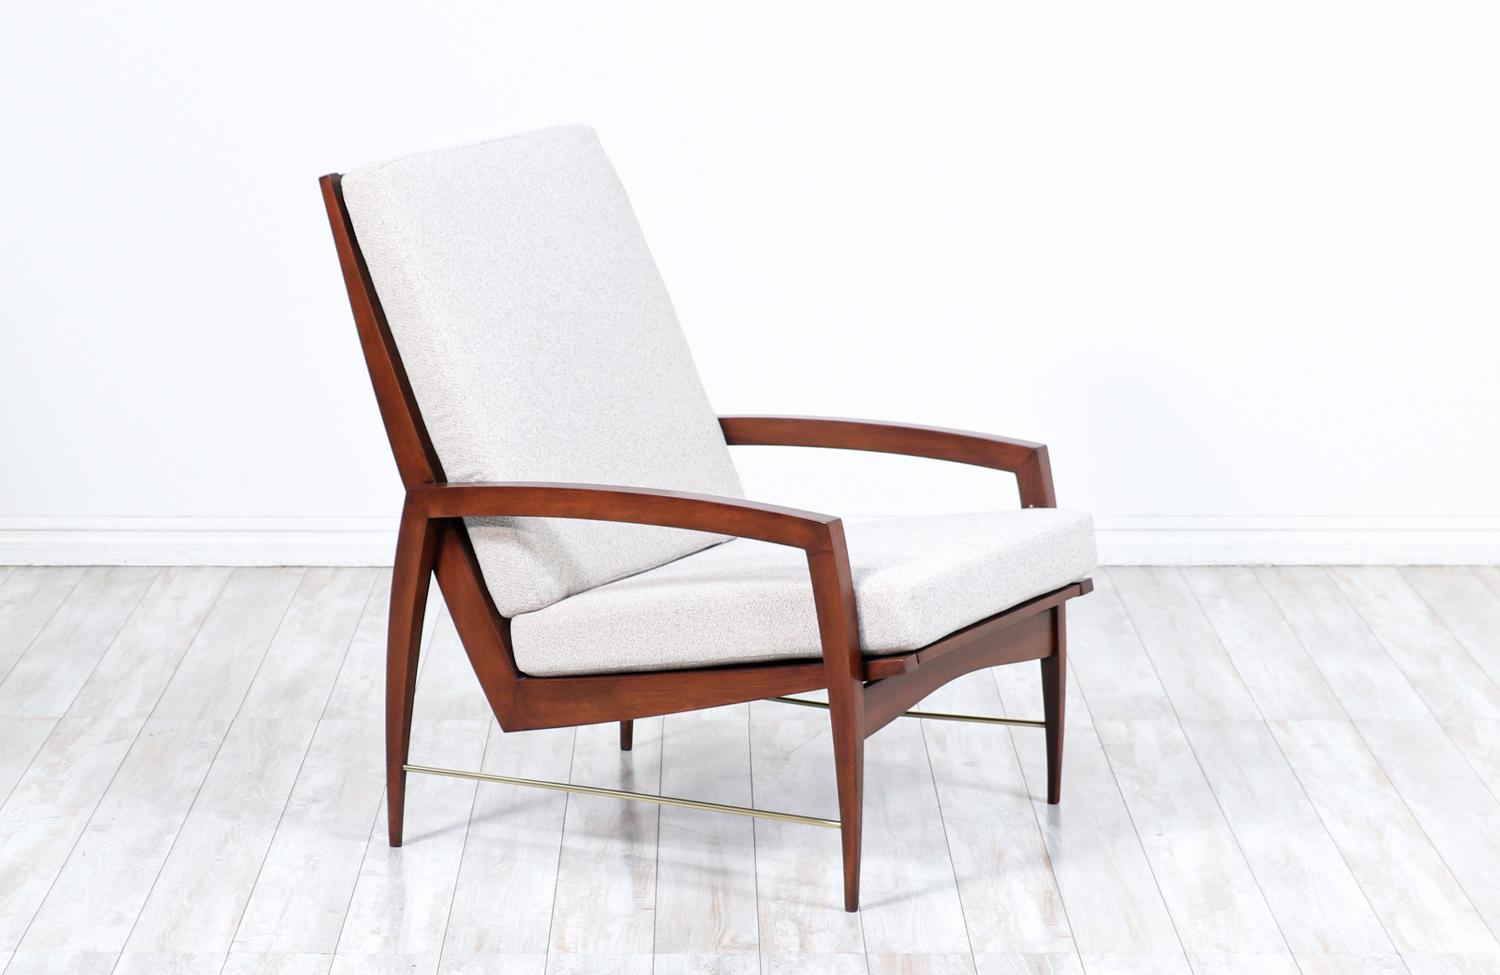 High-Back lounge chair designed by Dan Johnson for Selig and manufactured in Denmark circa 1950’s. Featuring a beautifully carved walnut-stained beechwood frame with five slats accentuating the high-back with curvilinear legs and arms that create an